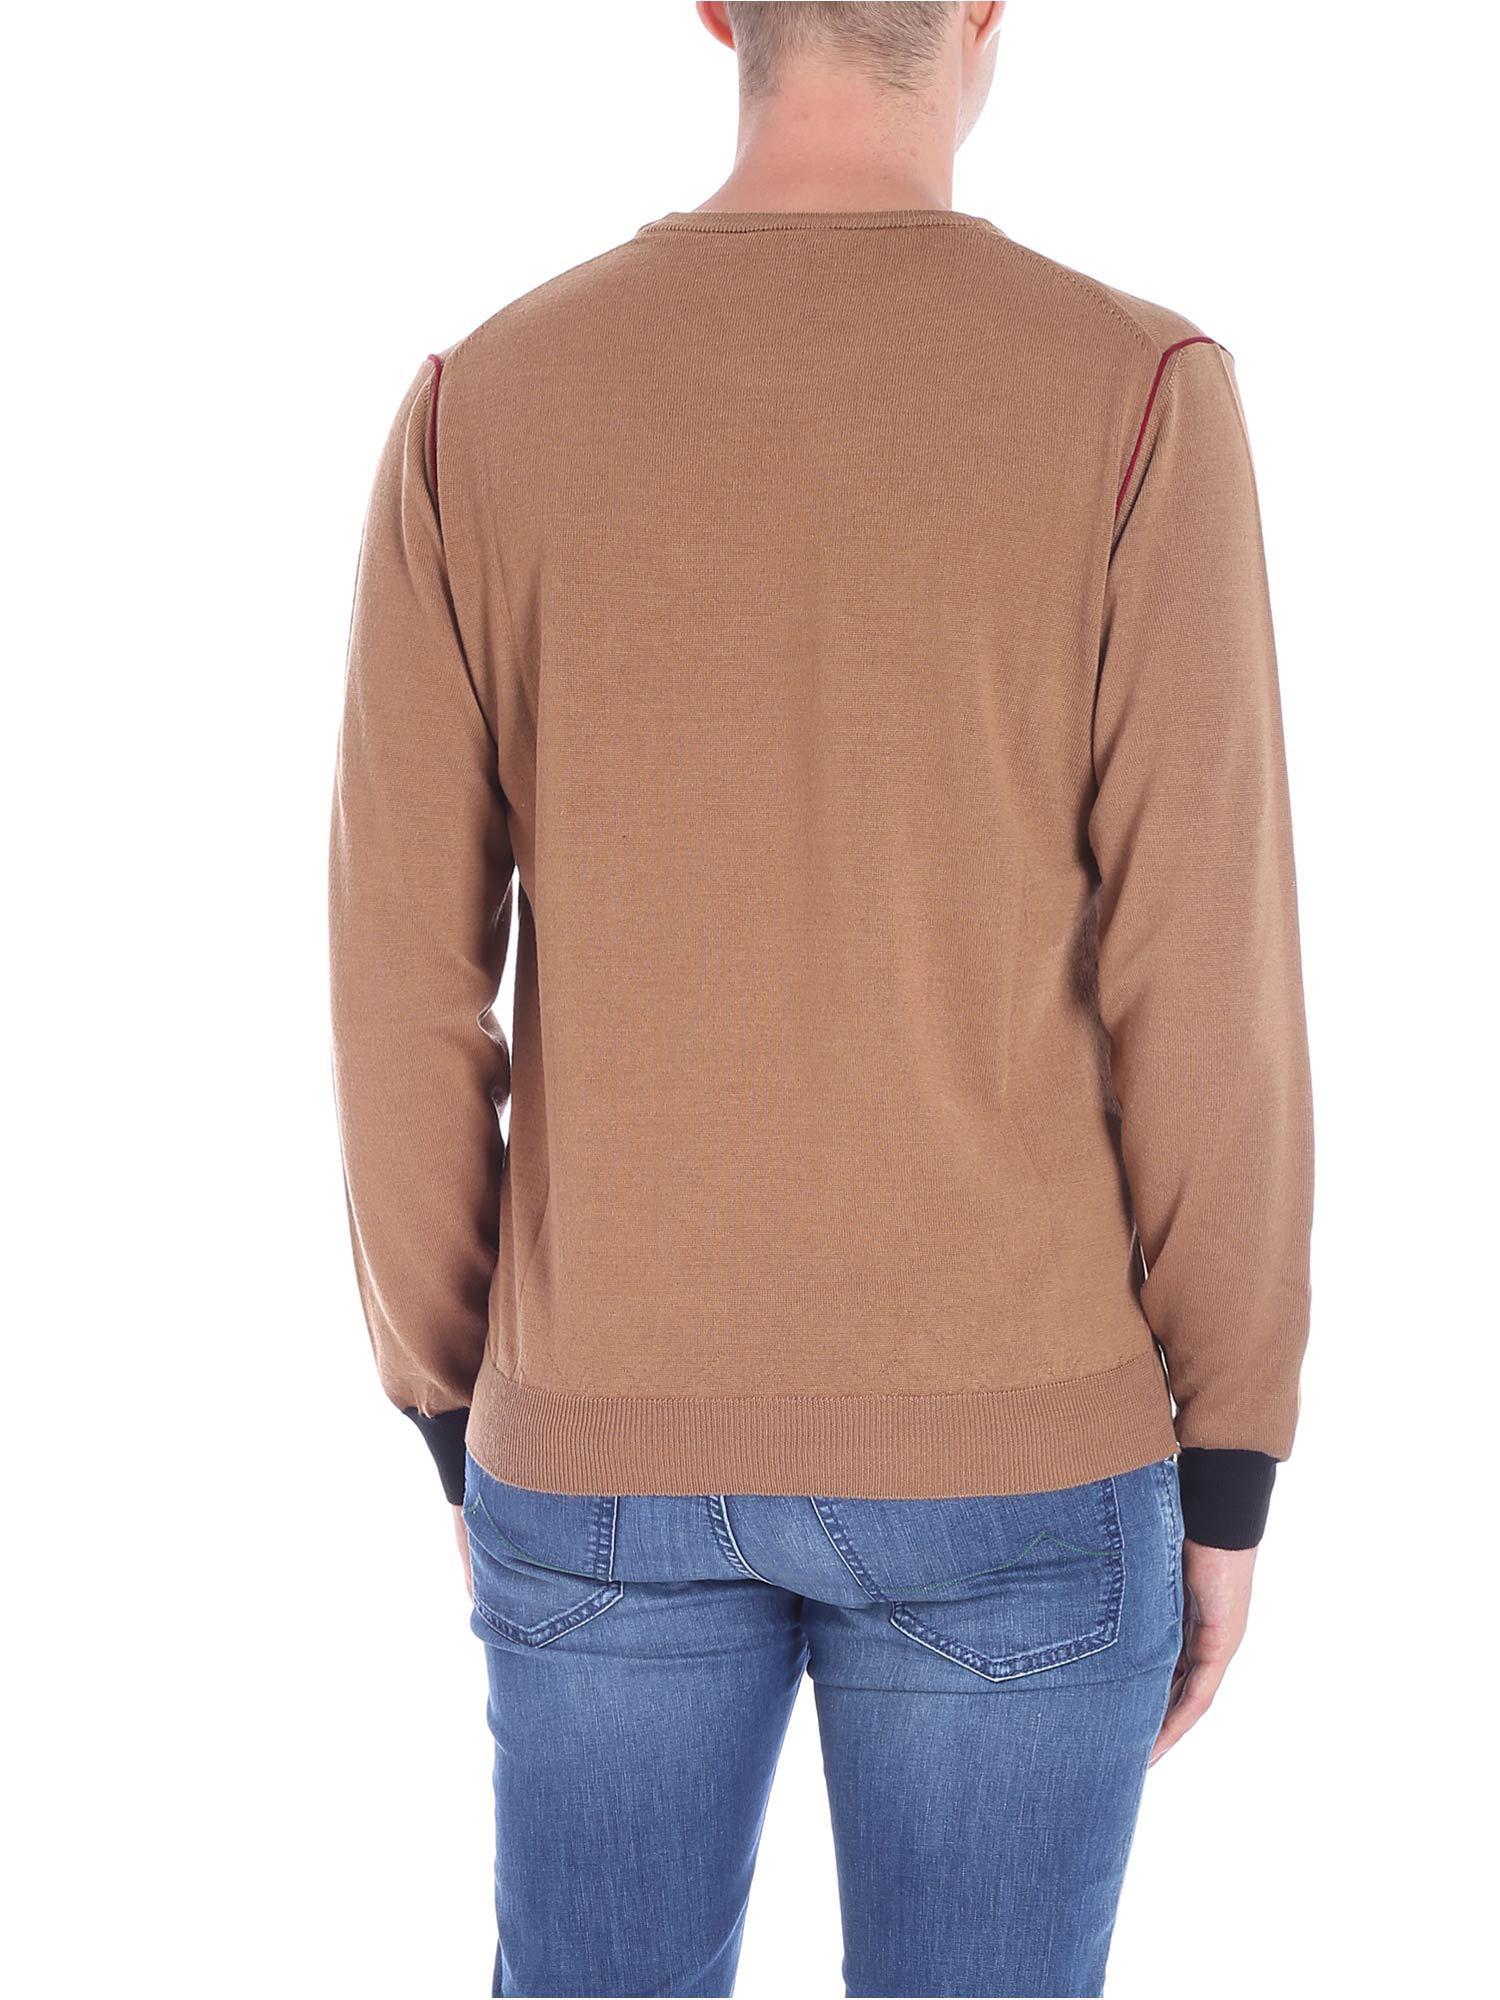 Trussardi Wool Camel Colored Pullover With Black Cuffs in Natural for Men -  Lyst